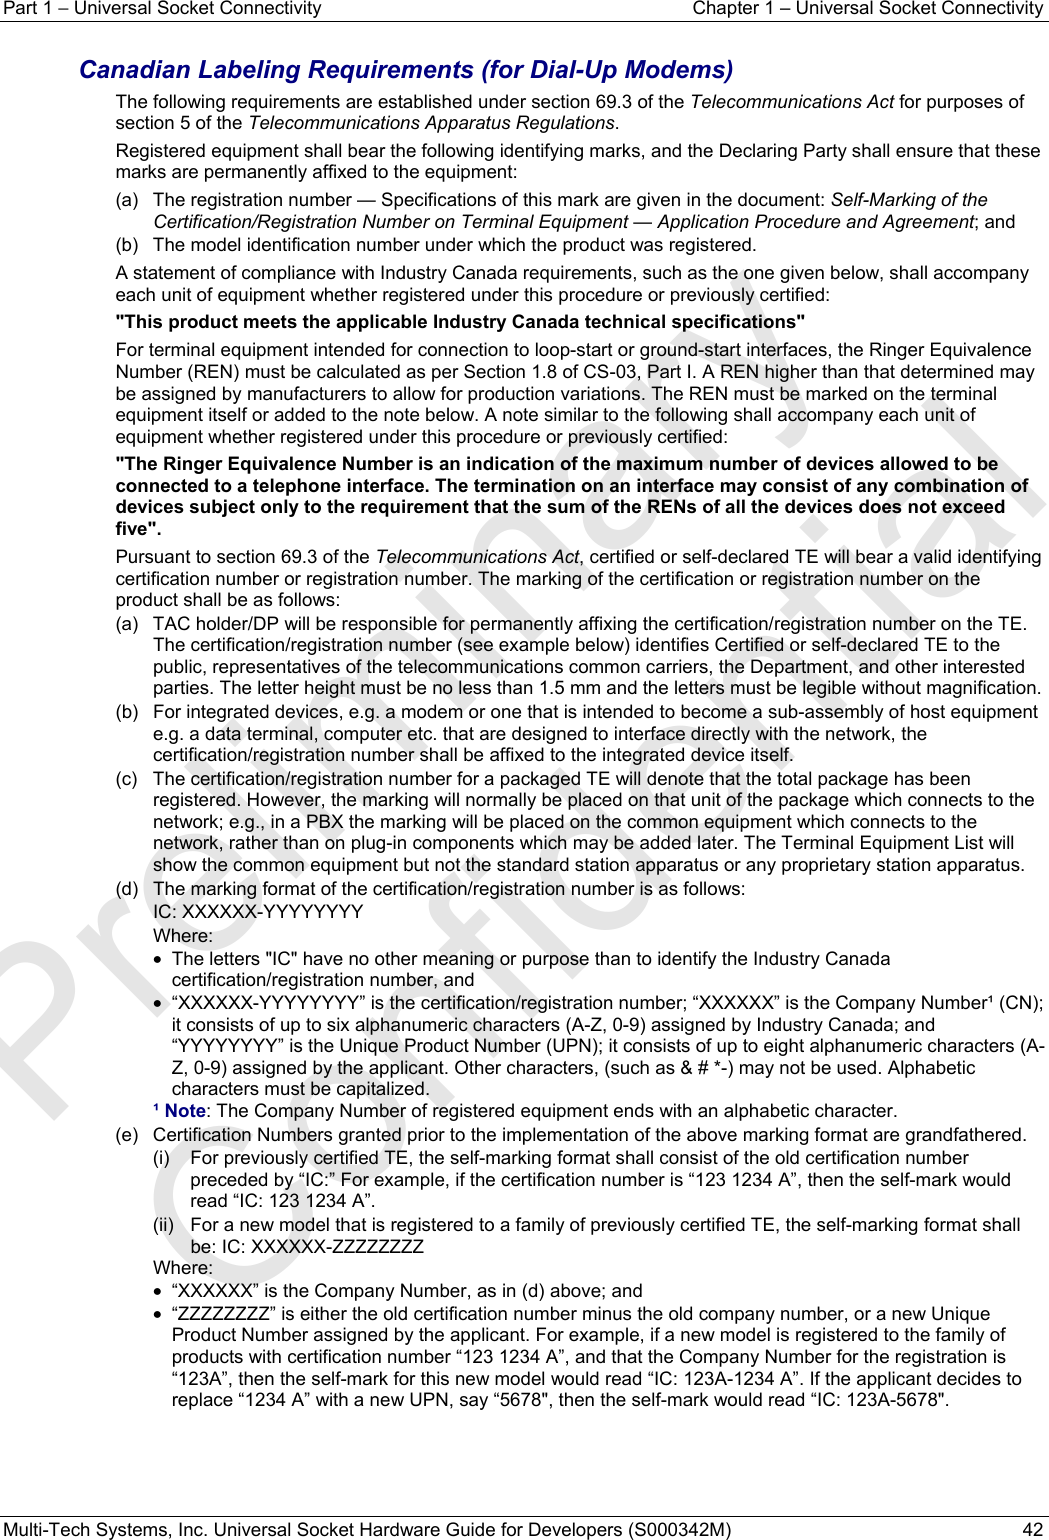 Part 1 − Universal Socket Connectivity  Chapter 1 – Universal Socket Connectivity Multi-Tech Systems, Inc. Universal Socket Hardware Guide for Developers (S000342M)  42  Canadian Labeling Requirements (for Dial-Up Modems) The following requirements are established under section 69.3 of the Telecommunications Act for purposes of section 5 of the Telecommunications Apparatus Regulations. Registered equipment shall bear the following identifying marks, and the Declaring Party shall ensure that these marks are permanently affixed to the equipment: (a)   The registration number — Specifications of this mark are given in the document: Self-Marking of the Certification/Registration Number on Terminal Equipment — Application Procedure and Agreement; and (b)   The model identification number under which the product was registered. A statement of compliance with Industry Canada requirements, such as the one given below, shall accompany each unit of equipment whether registered under this procedure or previously certified: &quot;This product meets the applicable Industry Canada technical specifications&quot; For terminal equipment intended for connection to loop-start or ground-start interfaces, the Ringer Equivalence Number (REN) must be calculated as per Section 1.8 of CS-03, Part I. A REN higher than that determined may be assigned by manufacturers to allow for production variations. The REN must be marked on the terminal equipment itself or added to the note below. A note similar to the following shall accompany each unit of equipment whether registered under this procedure or previously certified: &quot;The Ringer Equivalence Number is an indication of the maximum number of devices allowed to be connected to a telephone interface. The termination on an interface may consist of any combination of devices subject only to the requirement that the sum of the RENs of all the devices does not exceed five&quot;. Pursuant to section 69.3 of the Telecommunications Act, certified or self-declared TE will bear a valid identifying certification number or registration number. The marking of the certification or registration number on the product shall be as follows: (a)   TAC holder/DP will be responsible for permanently affixing the certification/registration number on the TE. The certification/registration number (see example below) identifies Certified or self-declared TE to the public, representatives of the telecommunications common carriers, the Department, and other interested parties. The letter height must be no less than 1.5 mm and the letters must be legible without magnification. (b)   For integrated devices, e.g. a modem or one that is intended to become a sub-assembly of host equipment e.g. a data terminal, computer etc. that are designed to interface directly with the network, the certification/registration number shall be affixed to the integrated device itself. (c)   The certification/registration number for a packaged TE will denote that the total package has been registered. However, the marking will normally be placed on that unit of the package which connects to the network; e.g., in a PBX the marking will be placed on the common equipment which connects to the network, rather than on plug-in components which may be added later. The Terminal Equipment List will show the common equipment but not the standard station apparatus or any proprietary station apparatus. (d)   The marking format of the certification/registration number is as follows: IC: XXXXXX-YYYYYYYY Where: •  The letters &quot;IC&quot; have no other meaning or purpose than to identify the Industry Canada certification/registration number, and •  “XXXXXX-YYYYYYYY” is the certification/registration number; “XXXXXX” is the Company Number¹ (CN); it consists of up to six alphanumeric characters (A-Z, 0-9) assigned by Industry Canada; and “YYYYYYYY” is the Unique Product Number (UPN); it consists of up to eight alphanumeric characters (A-Z, 0-9) assigned by the applicant. Other characters, (such as &amp; # *-) may not be used. Alphabetic characters must be capitalized. ¹ Note: The Company Number of registered equipment ends with an alphabetic character. (e)   Certification Numbers granted prior to the implementation of the above marking format are grandfathered. (i)   For previously certified TE, the self-marking format shall consist of the old certification number preceded by “IC:” For example, if the certification number is “123 1234 A”, then the self-mark would read “IC: 123 1234 A”. (ii)   For a new model that is registered to a family of previously certified TE, the self-marking format shall be: IC: XXXXXX-ZZZZZZZZ Where:  •  “XXXXXX” is the Company Number, as in (d) above; and •  “ZZZZZZZZ” is either the old certification number minus the old company number, or a new Unique Product Number assigned by the applicant. For example, if a new model is registered to the family of products with certification number “123 1234 A”, and that the Company Number for the registration is “123A”, then the self-mark for this new model would read “IC: 123A-1234 A”. If the applicant decides to replace “1234 A” with a new UPN, say “5678&quot;, then the self-mark would read “IC: 123A-5678&quot;.   Preliminary  Confidential